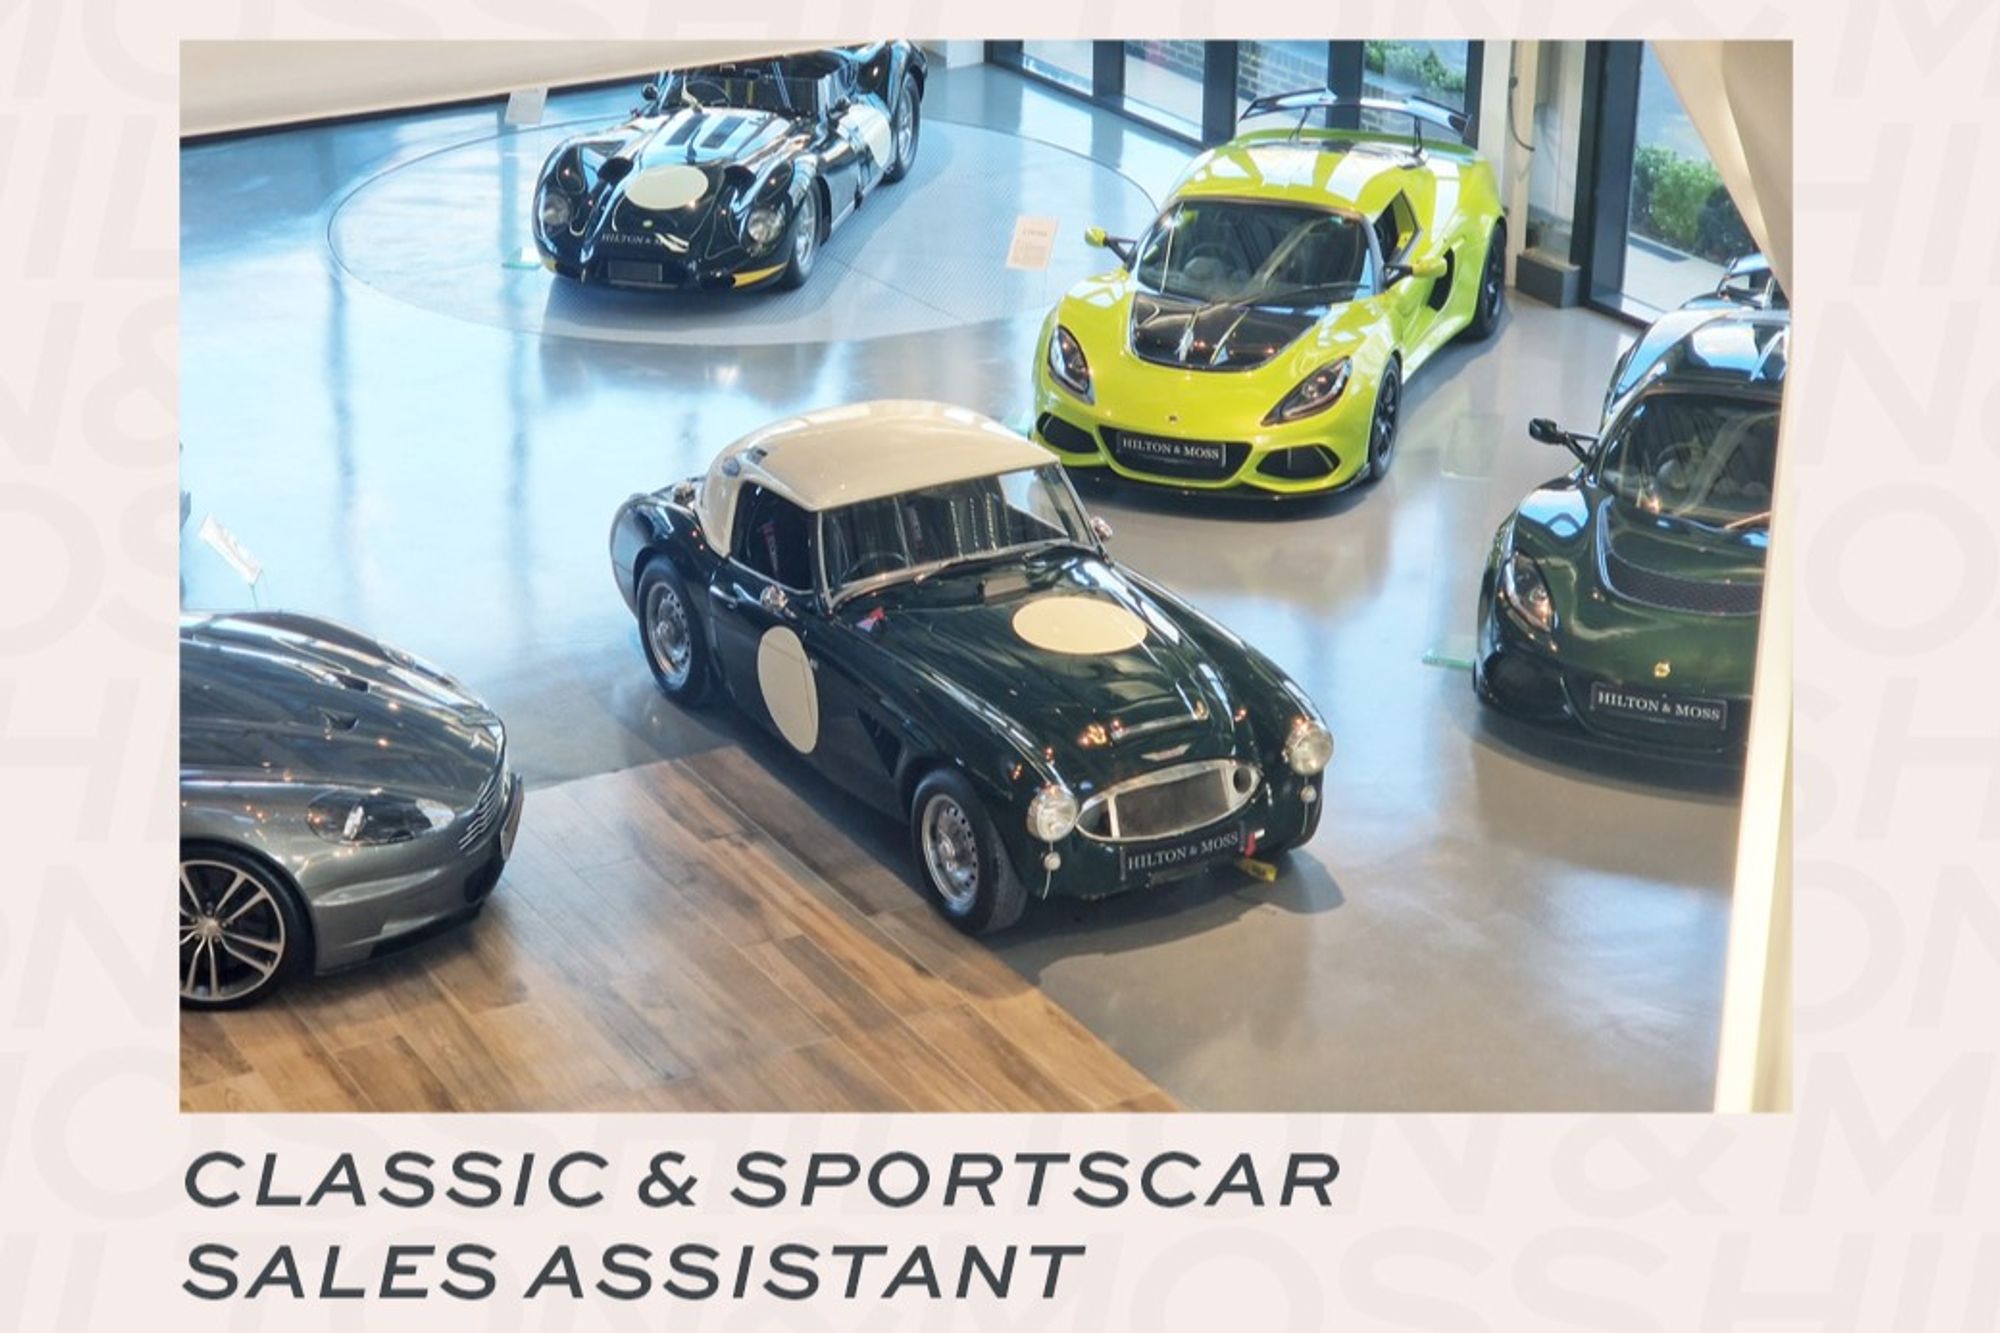 We Are Hiring | Classic & Sportscar Sales Assistant